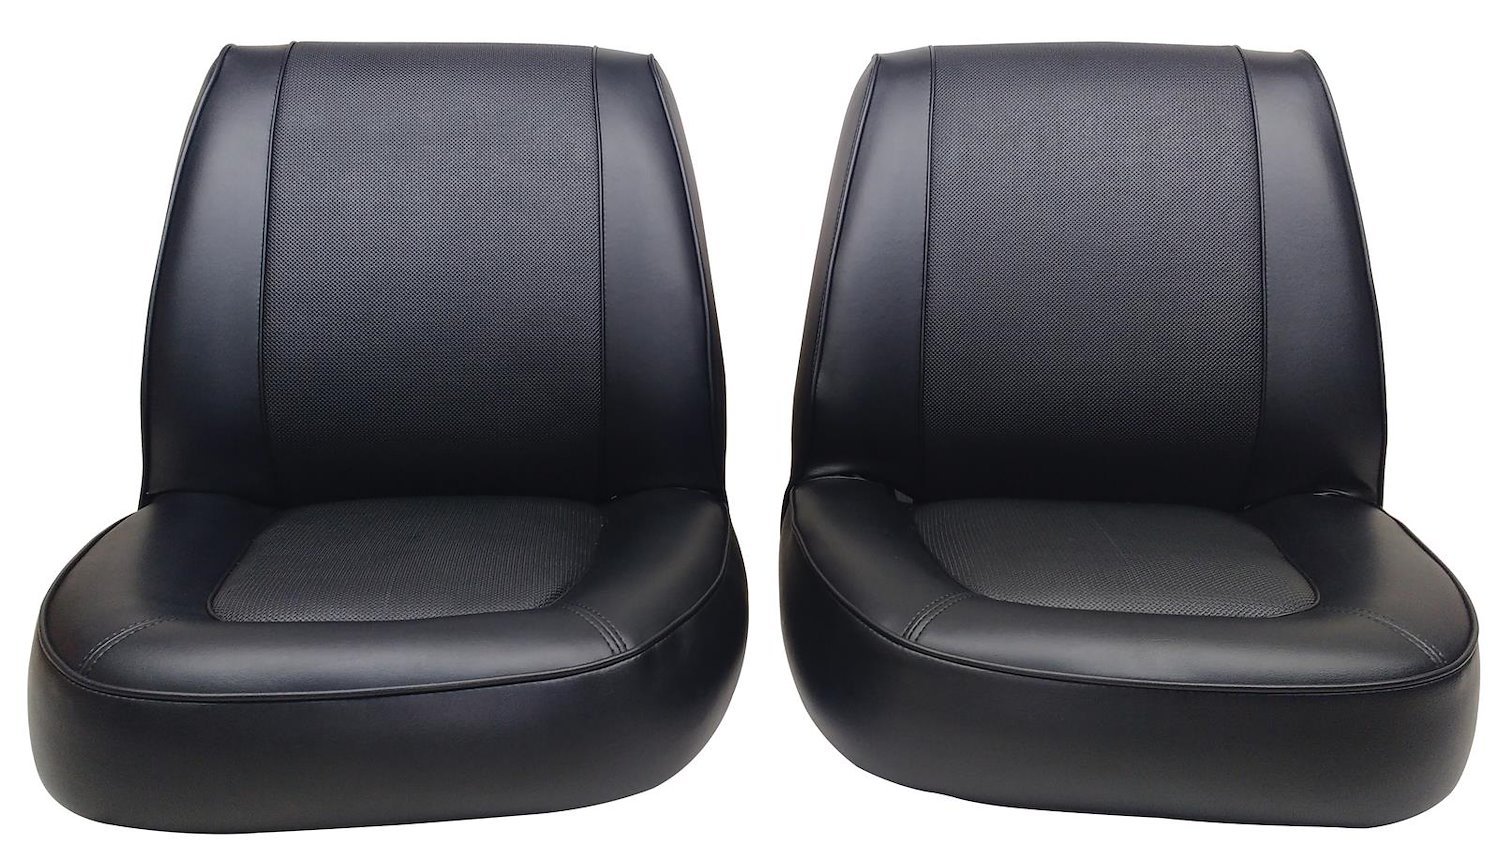 1964 Ford Falcon Futura 2-Door and Ranchero Deluxe Interior Two-Tone Front Bucket Seat Upholstery Set